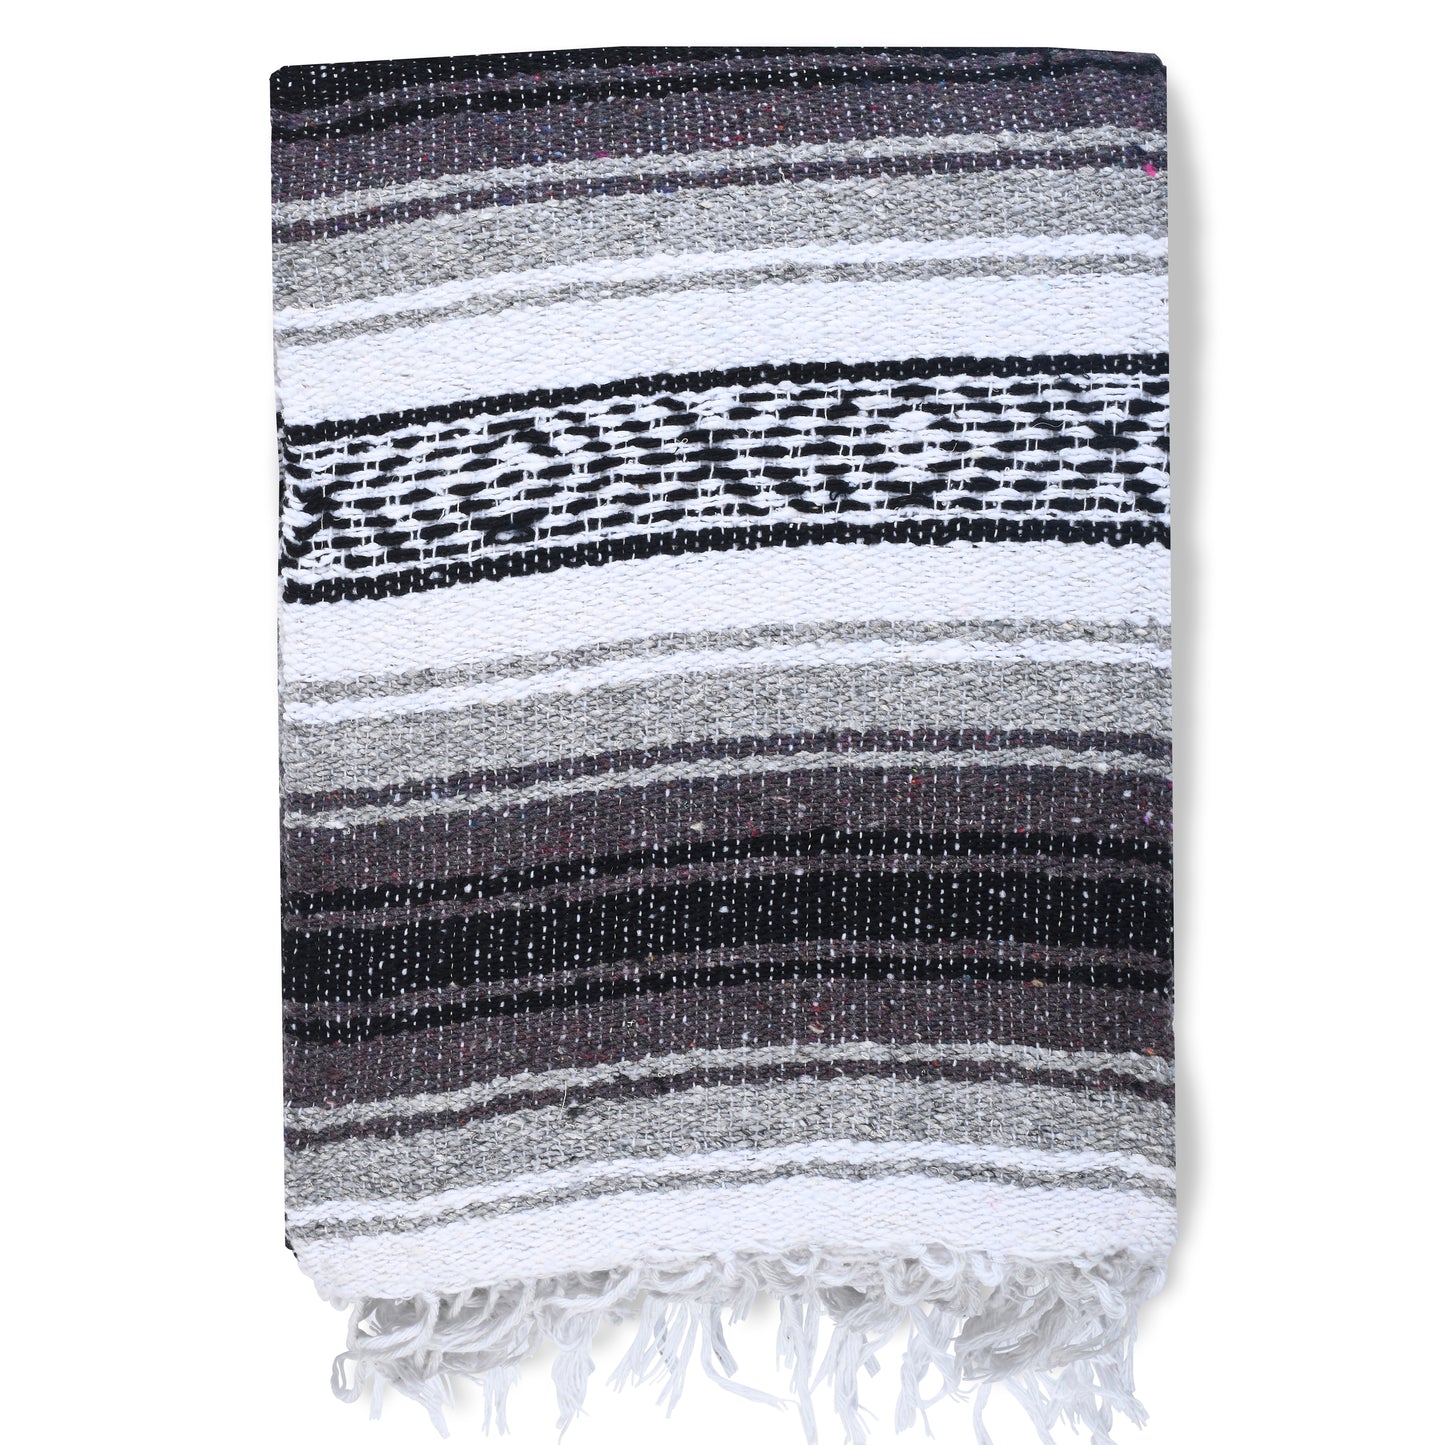 Mexican Blanket, Stone - for Yoga, Camping, Picnics, Travel, Beach - WHOLESALE